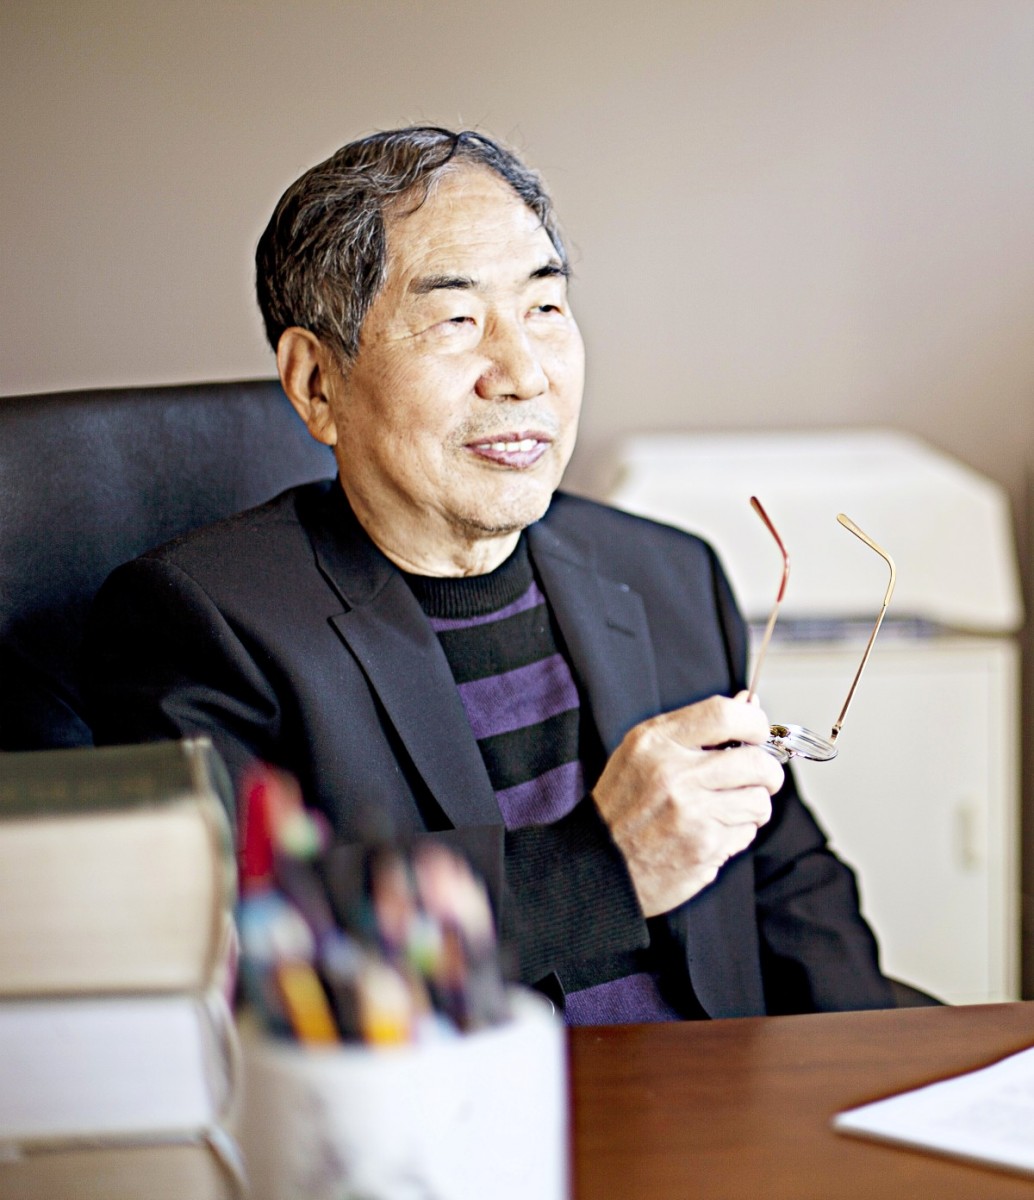 Li Baoqing, a prominent Chinese scientist